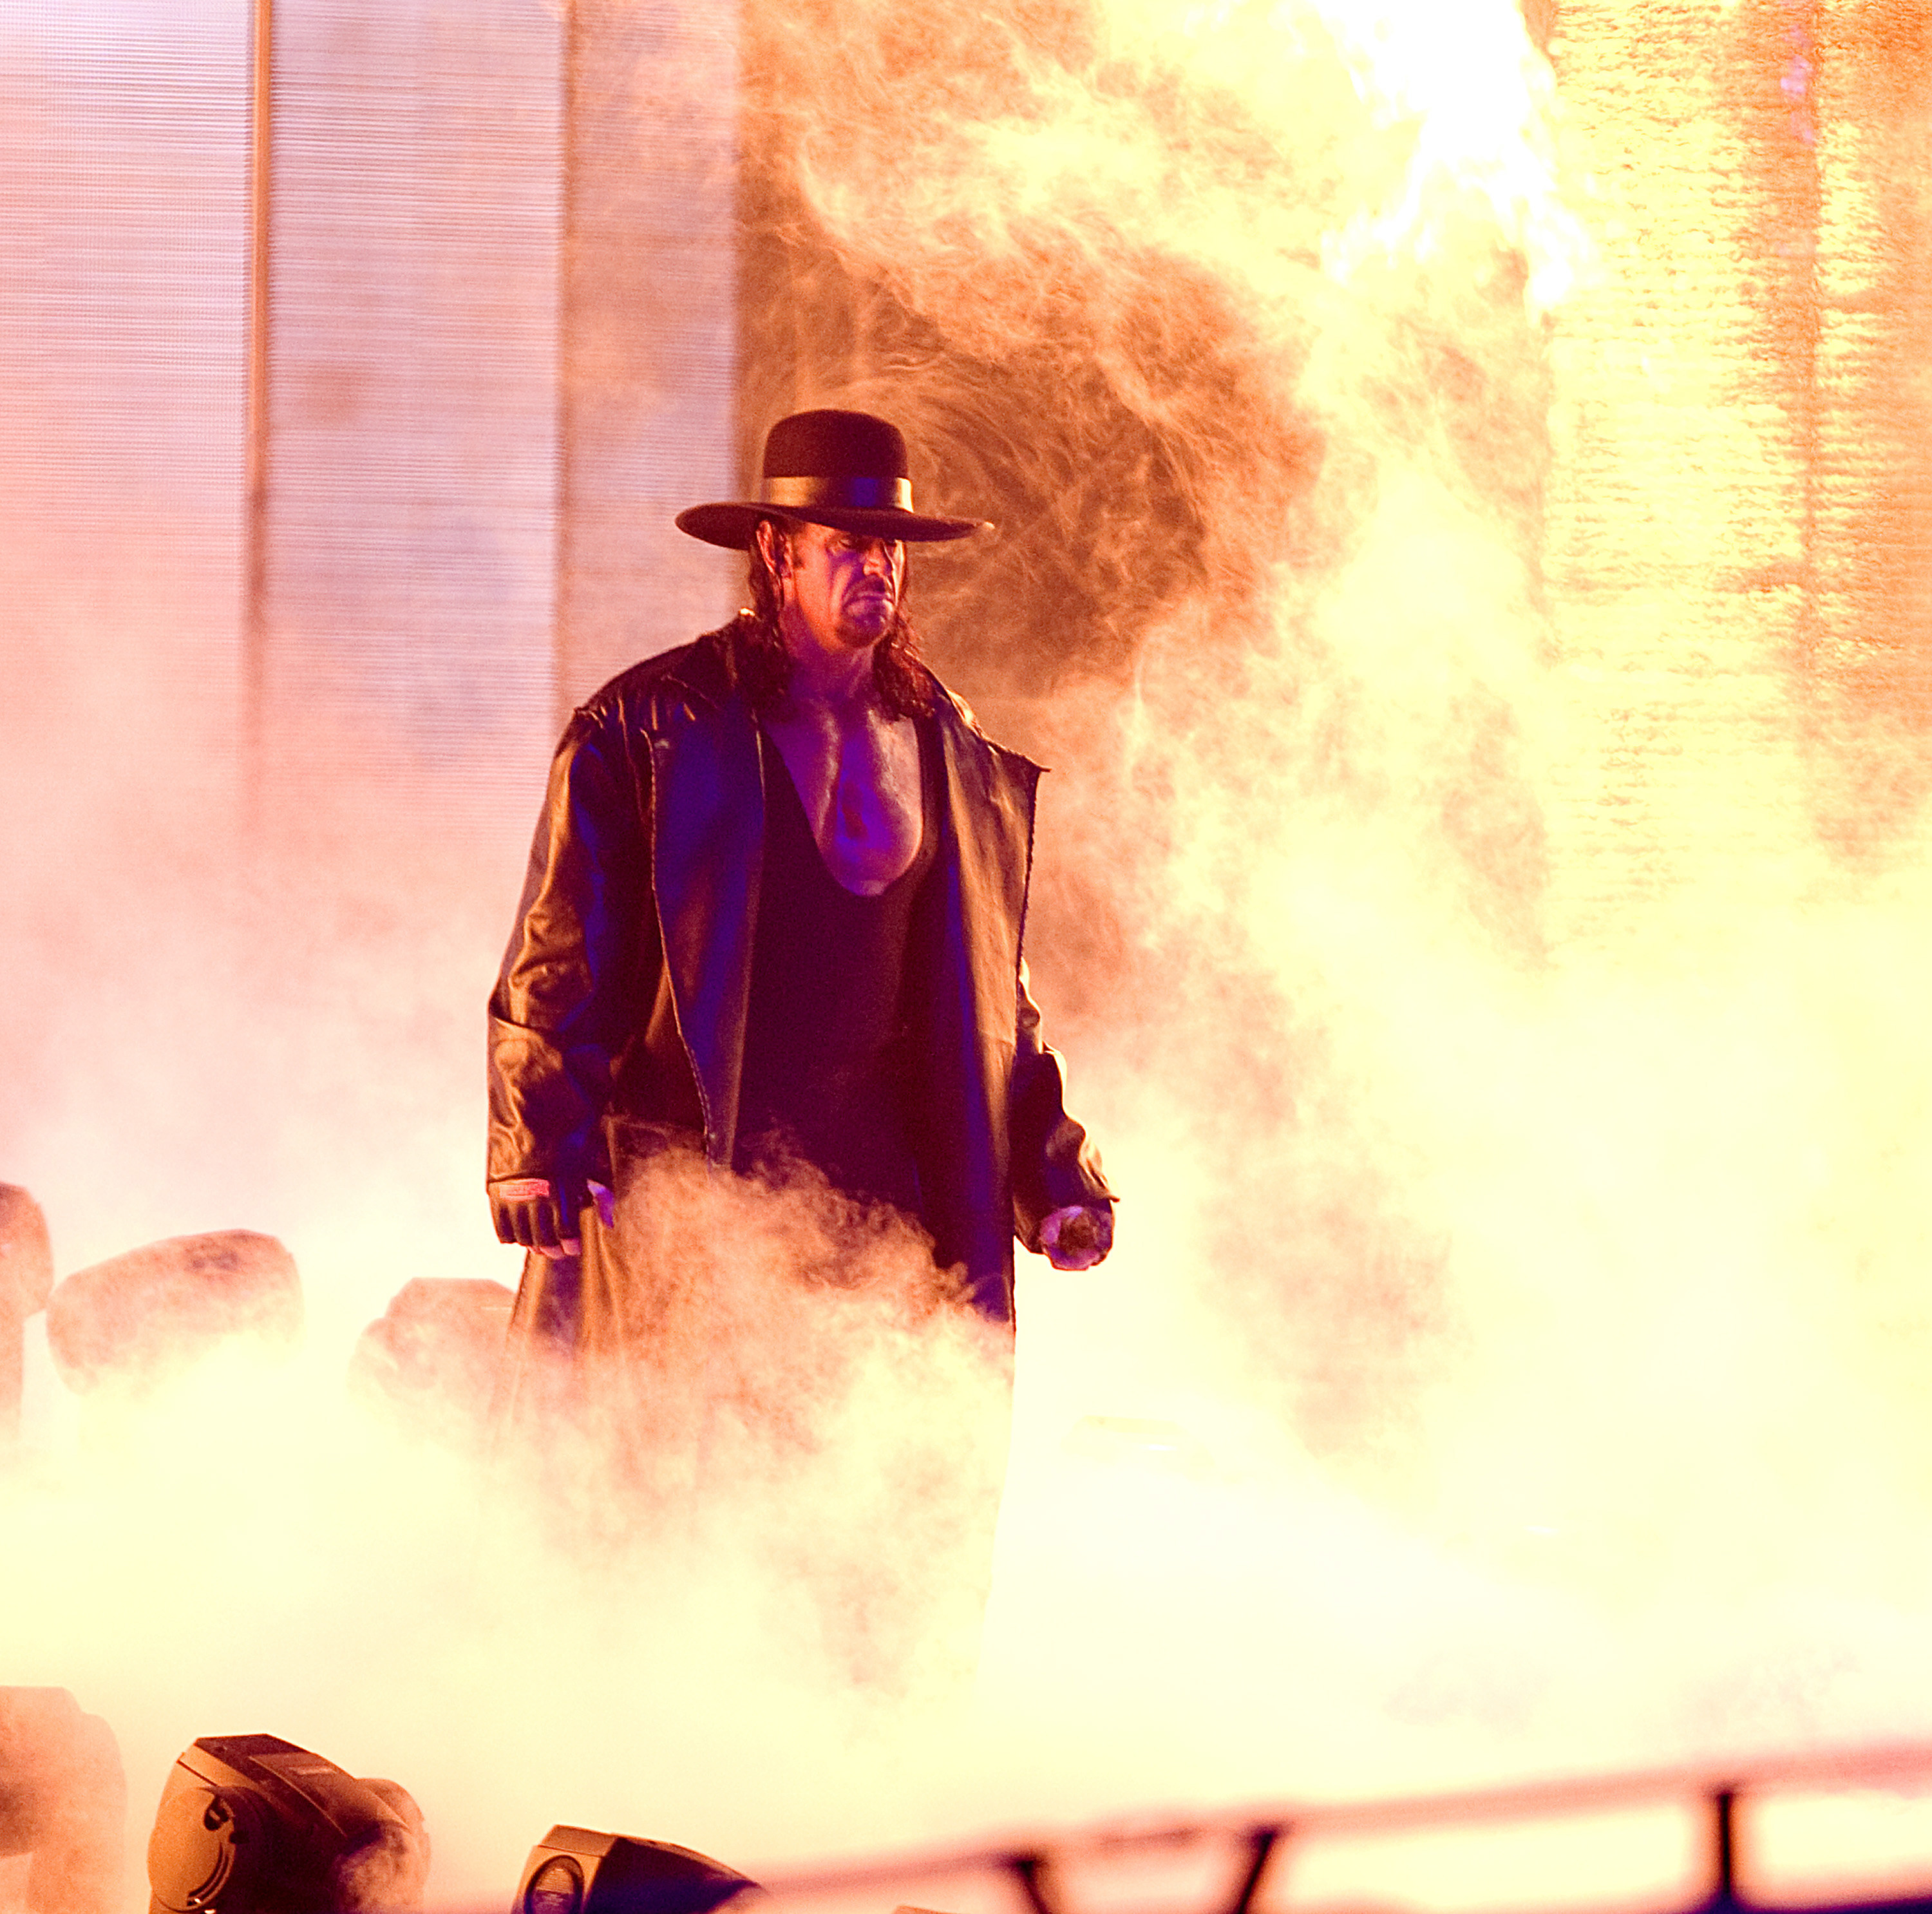 The Undertaker makes his way to the ring for his match with Shawn Michaels at WrestleMania 25